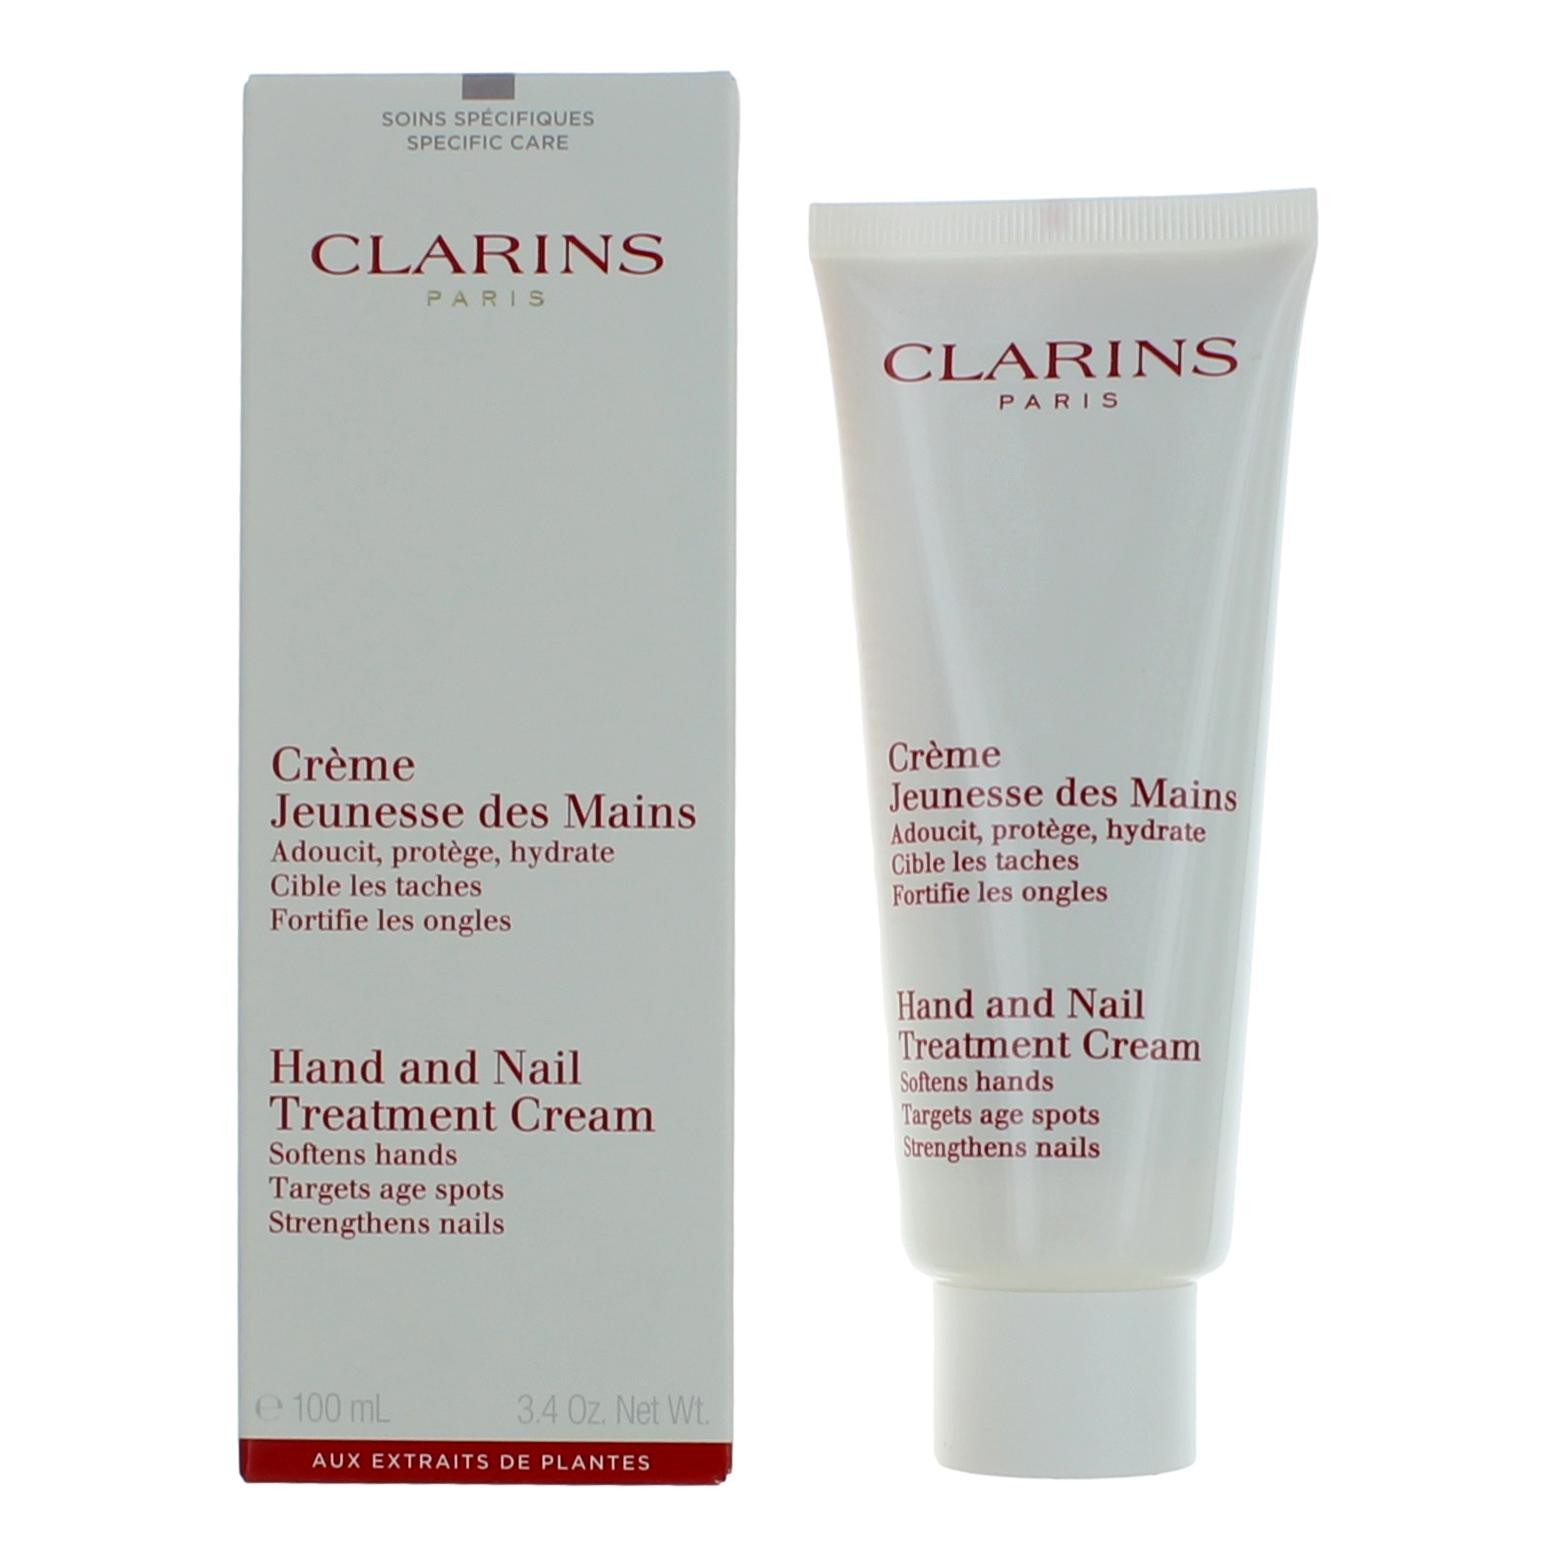 Clarins by Clarins 3.4 oz Hand and Nail Treatment Cream